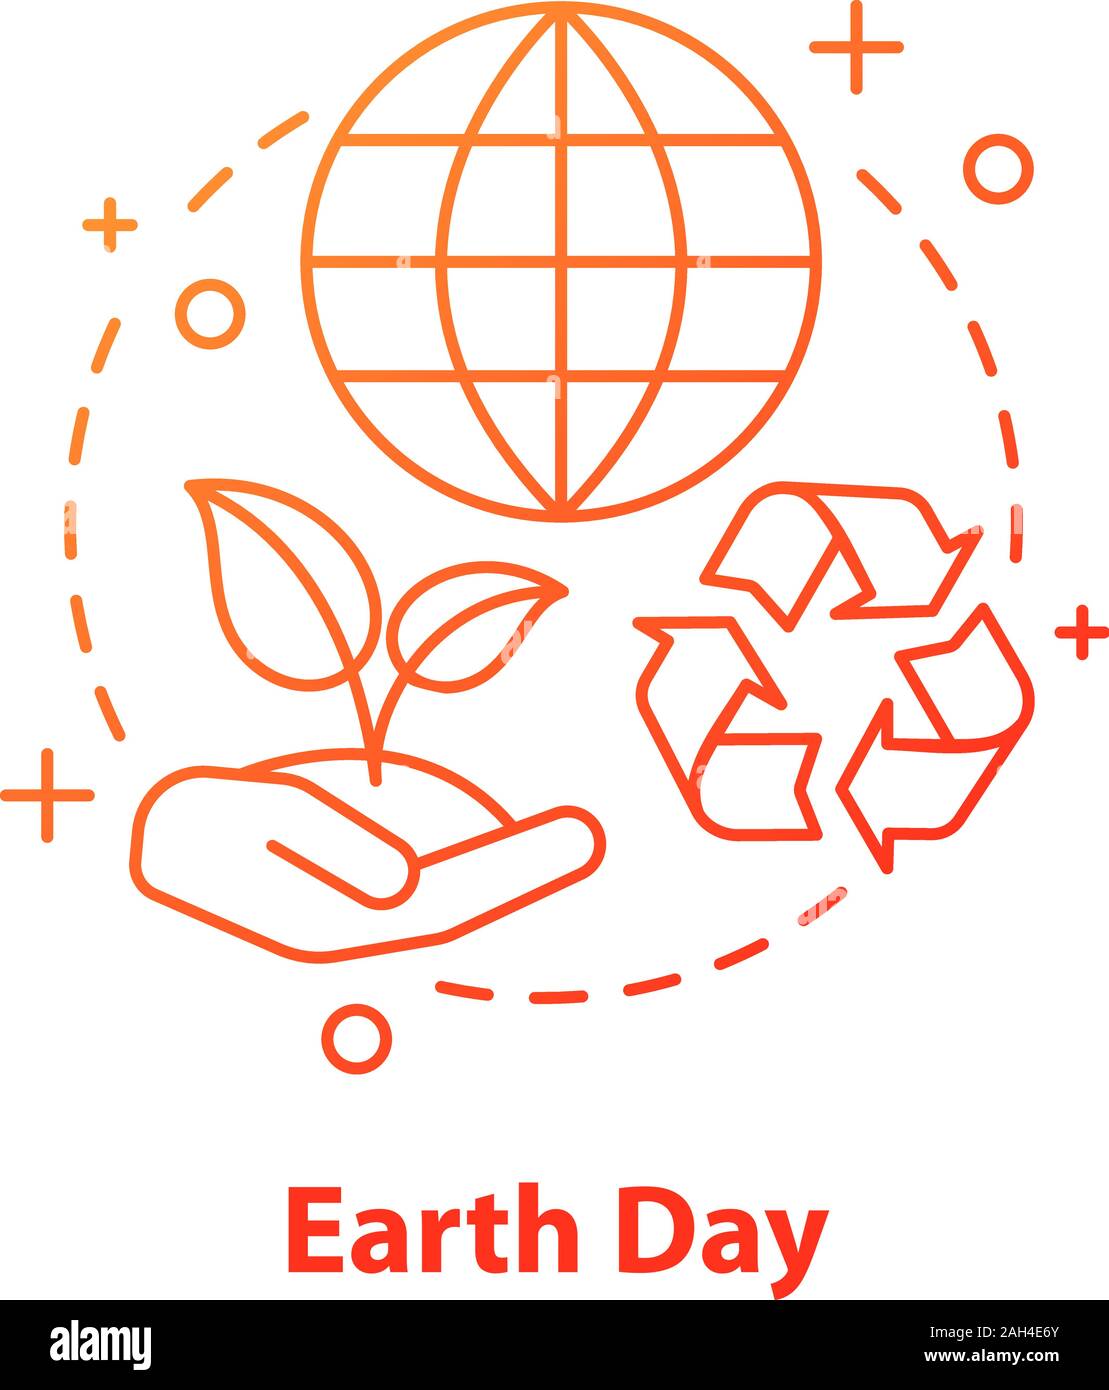 10+ Easy EARTH DAY Drawing Ideas with Videos-saigonsouth.com.vn